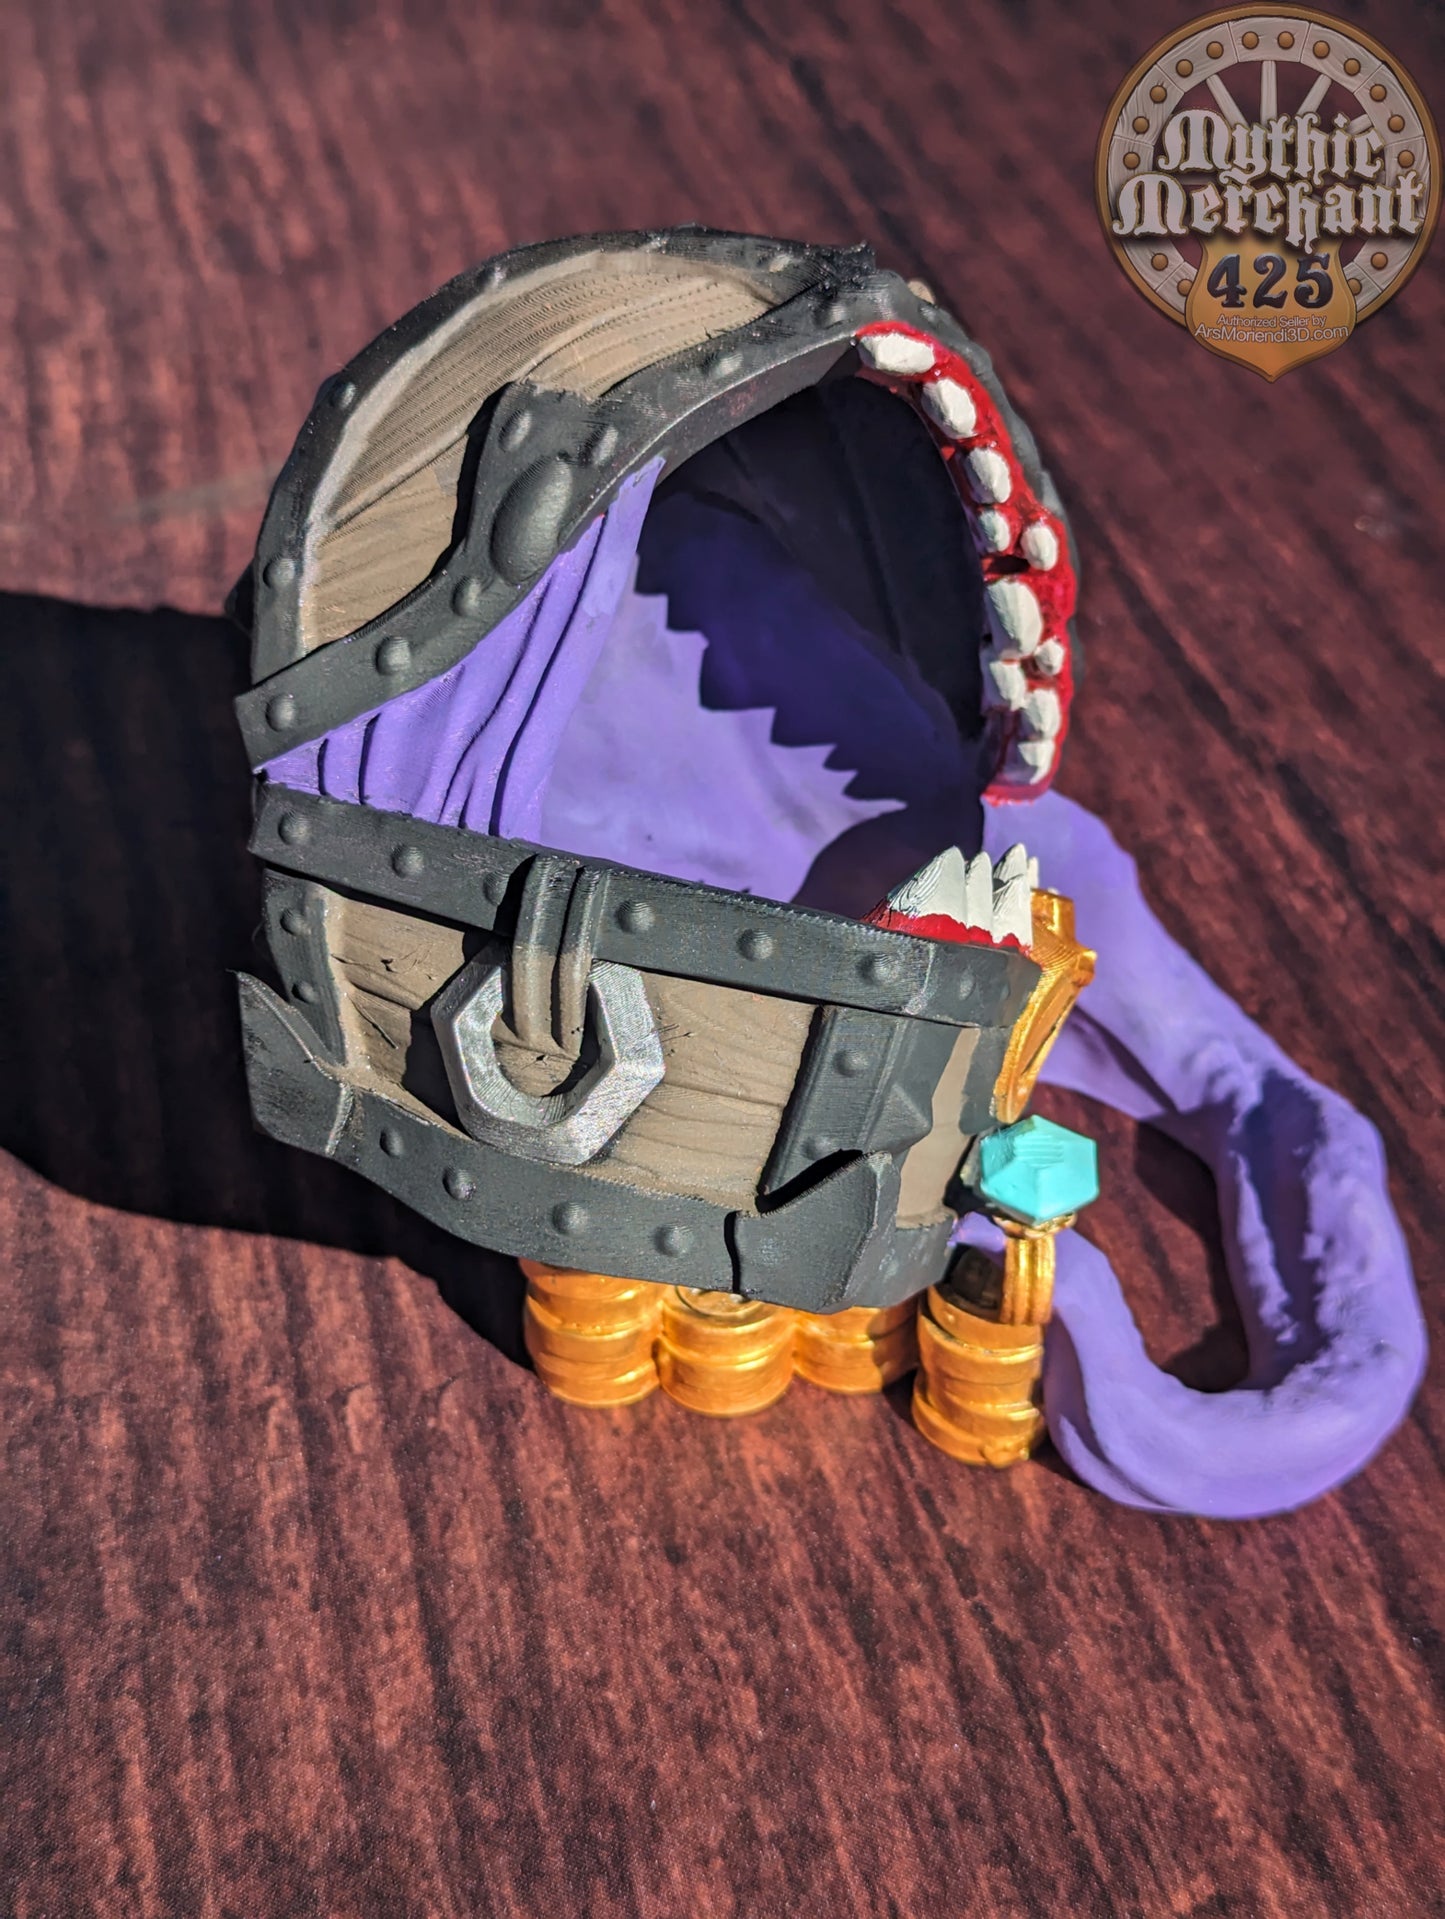 Mimic Treasure Chest 3D Printed Dice Tower - Mythic Mugs Collection by Ars Moriendi 3D| Dice Tray | D20 Dice Vault - Unleash the Mimic Magic